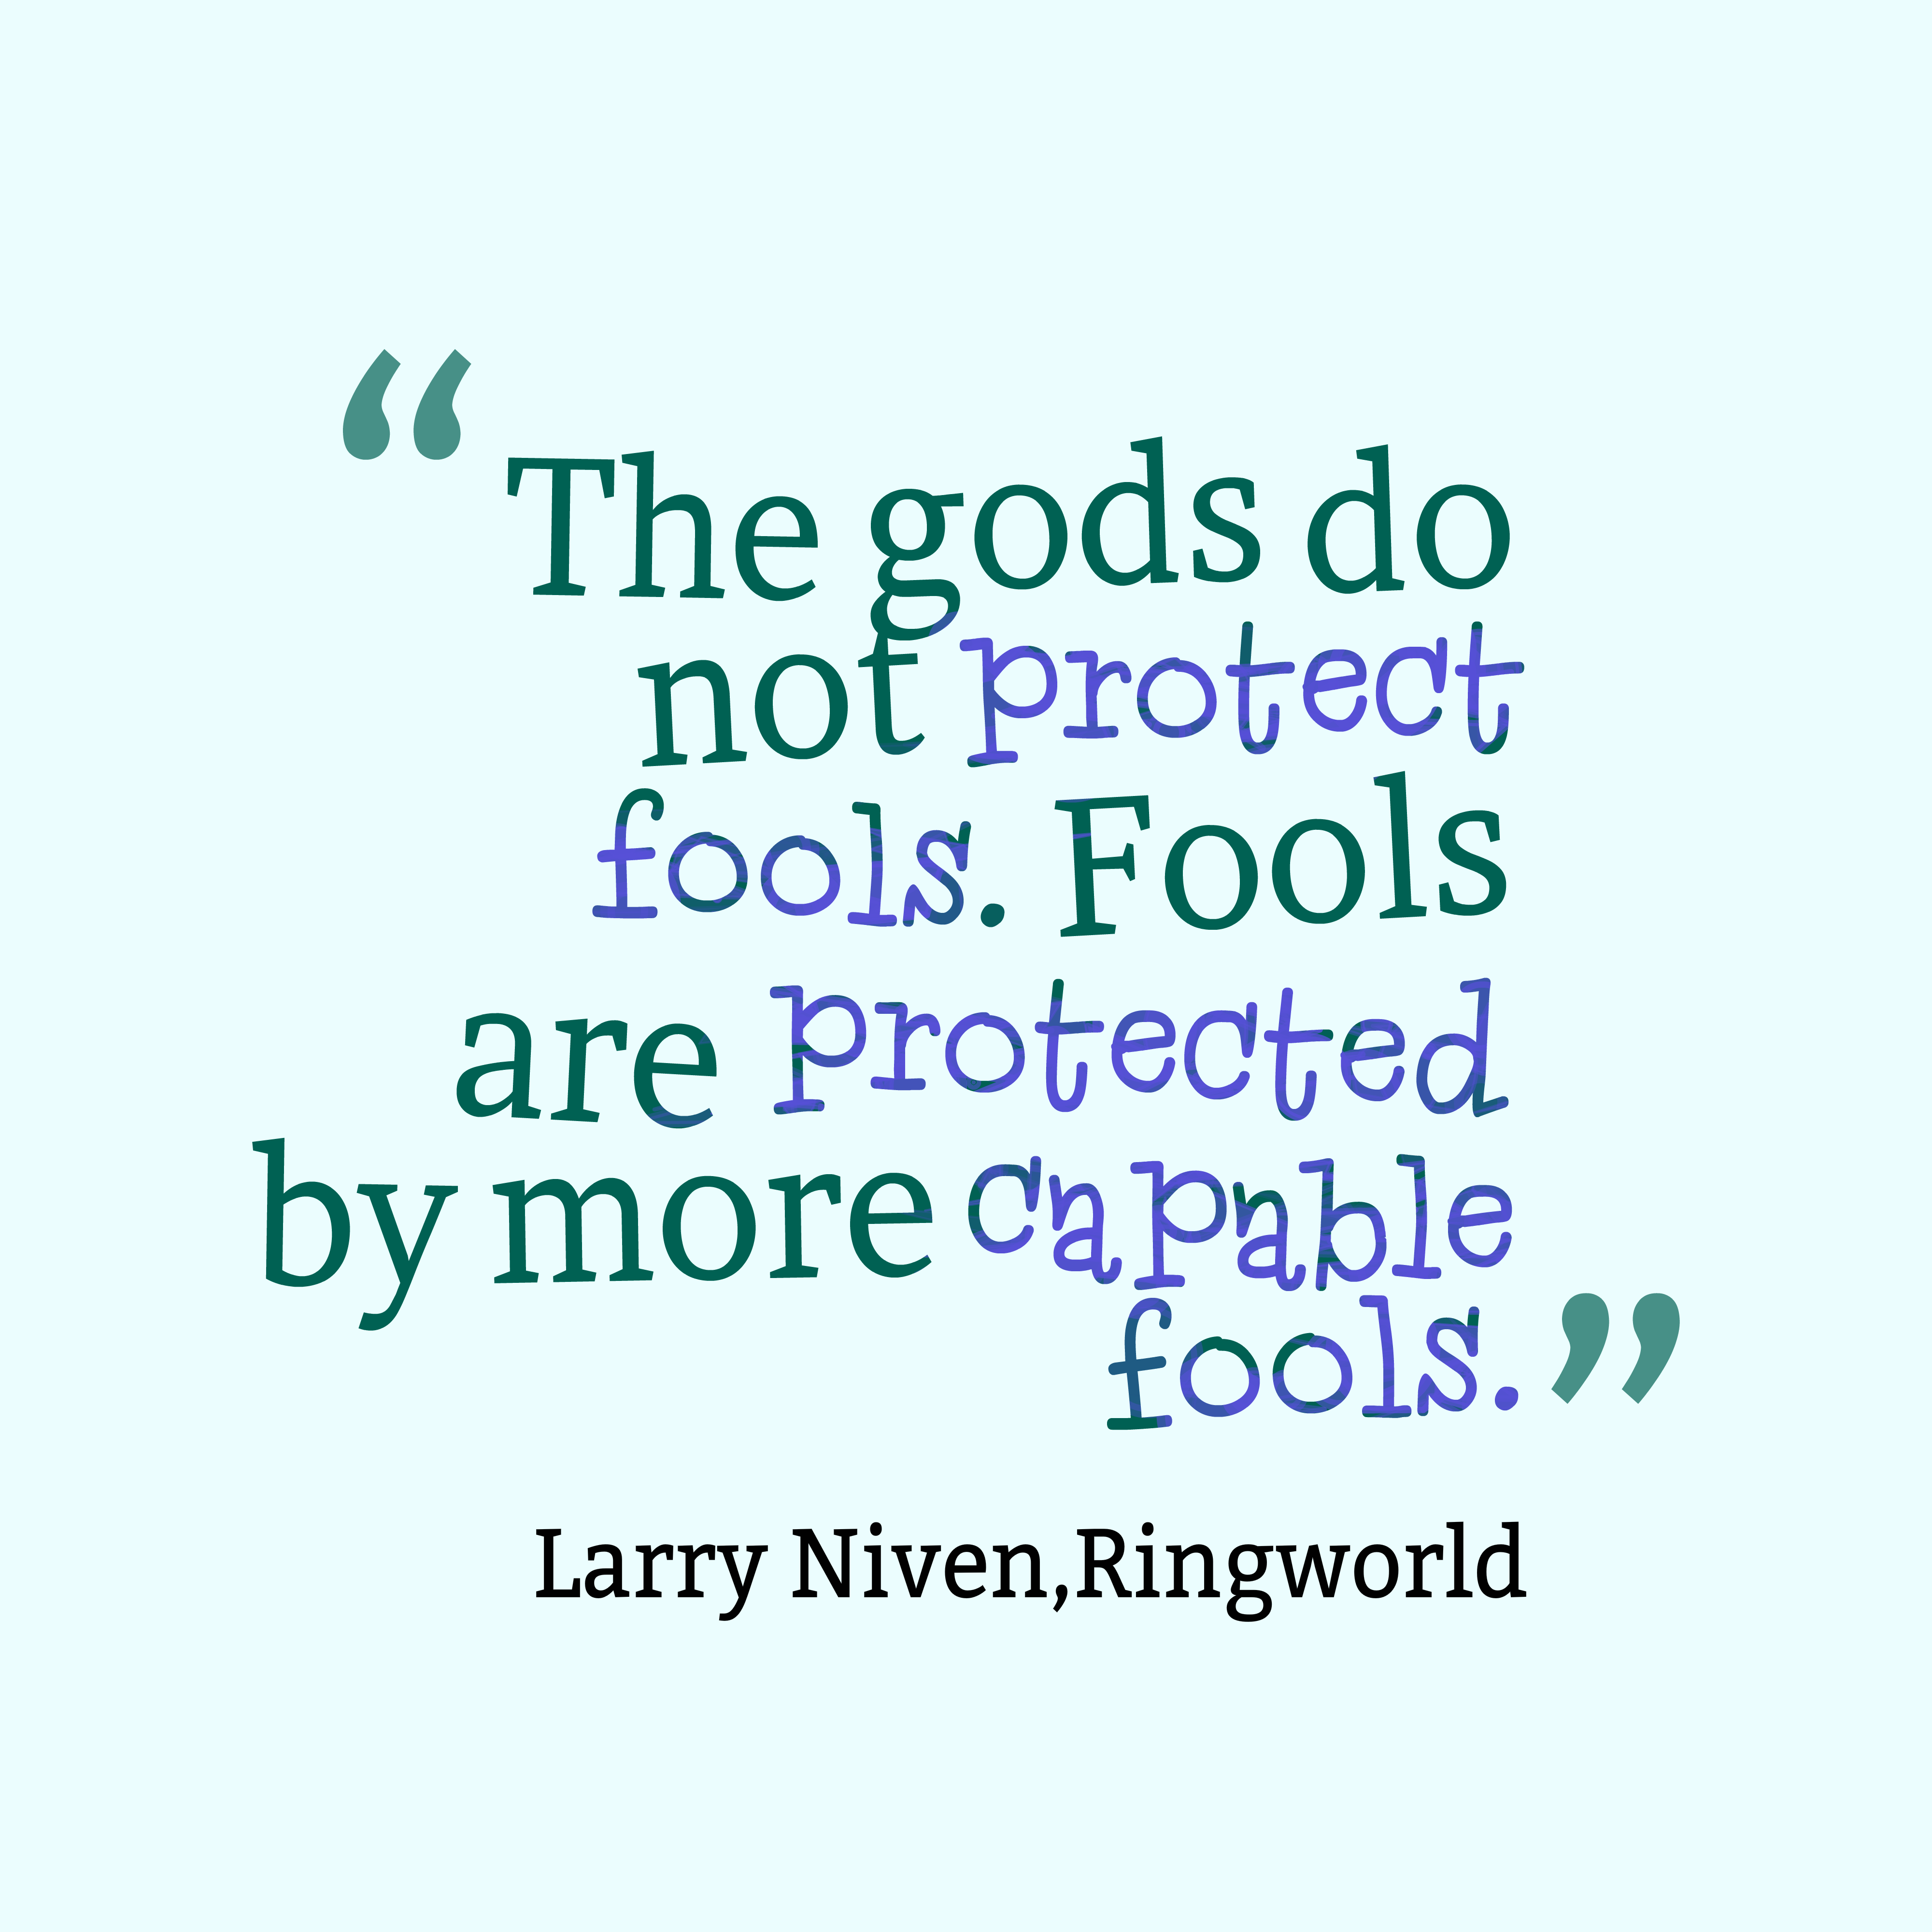 The gods do not protect fools. Fools are protected by more capable fools. Larry Niven